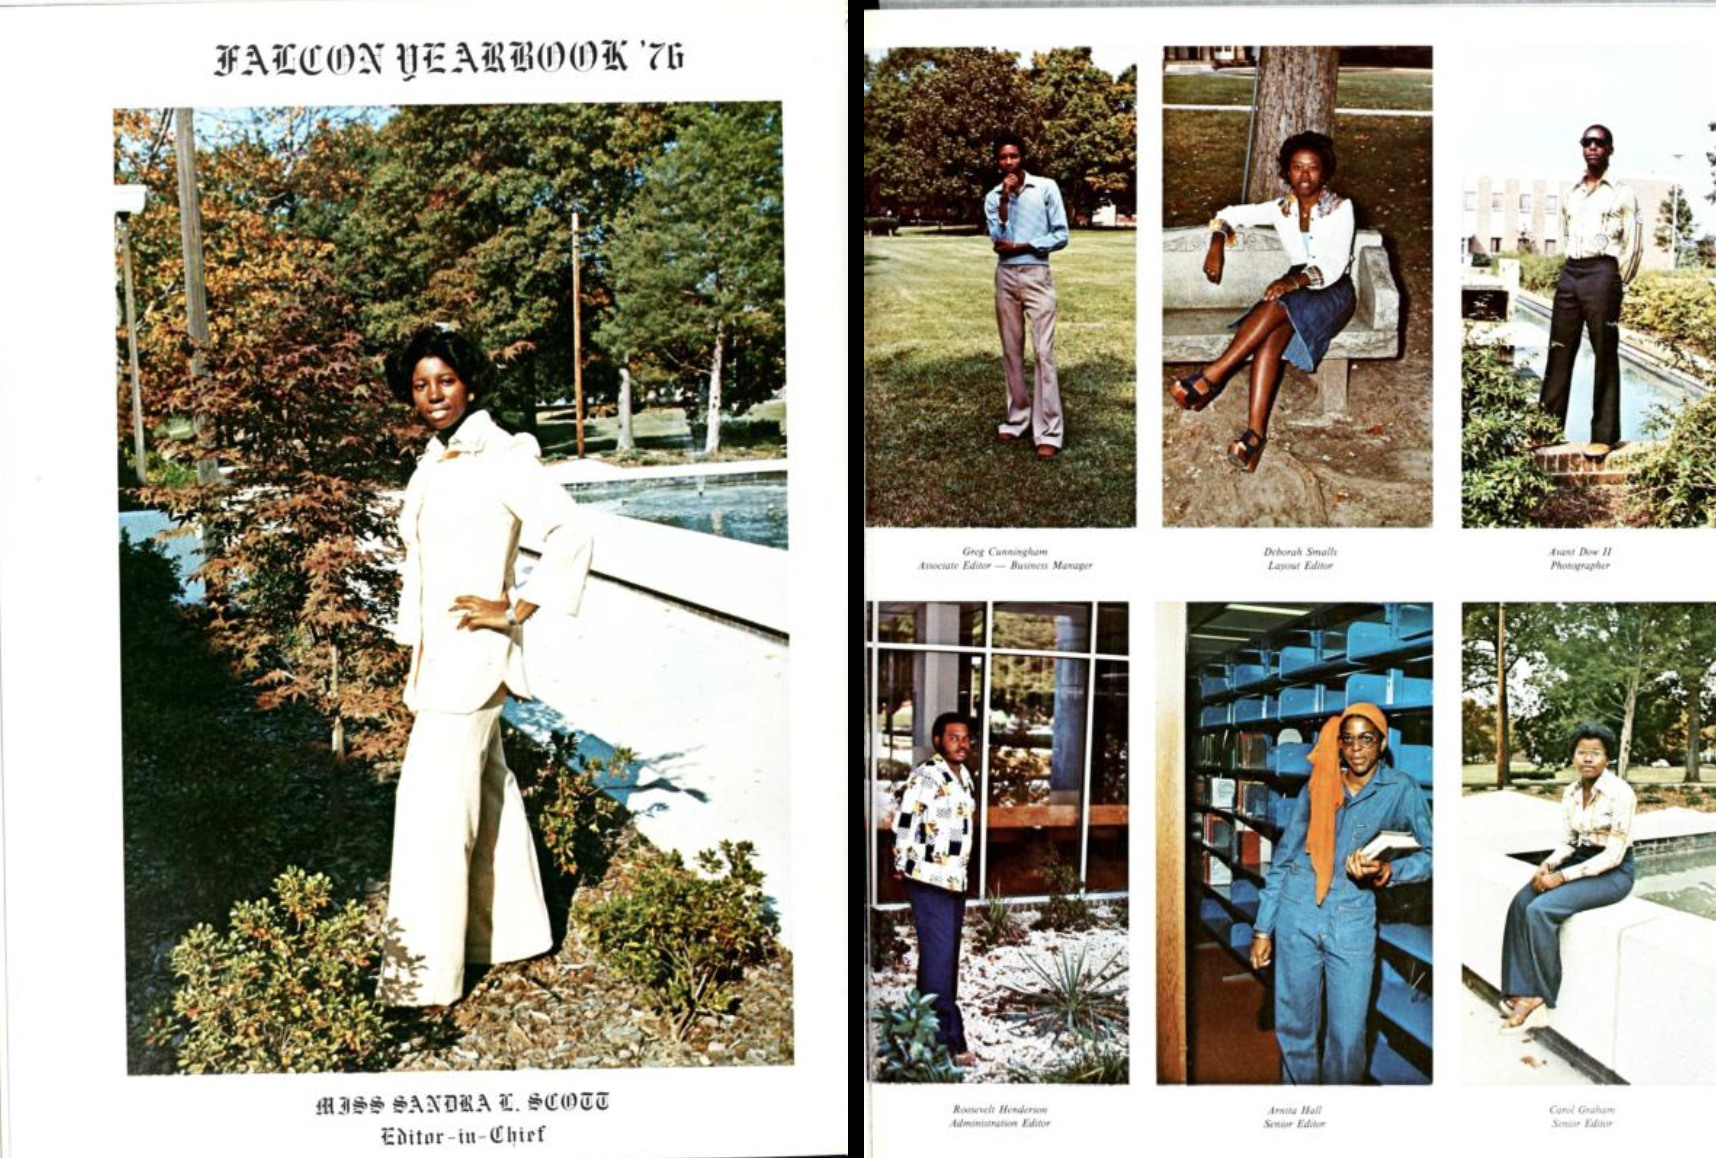 Two-page spread from the 1976 Saint Augustine's University yearbook, The Falcon. The left page features a color photo of the yearbook editor-in-chief Sandra C. Scott. The right page has colored photos of the rest of the yearbook staff; all are posed in various styles and locations.